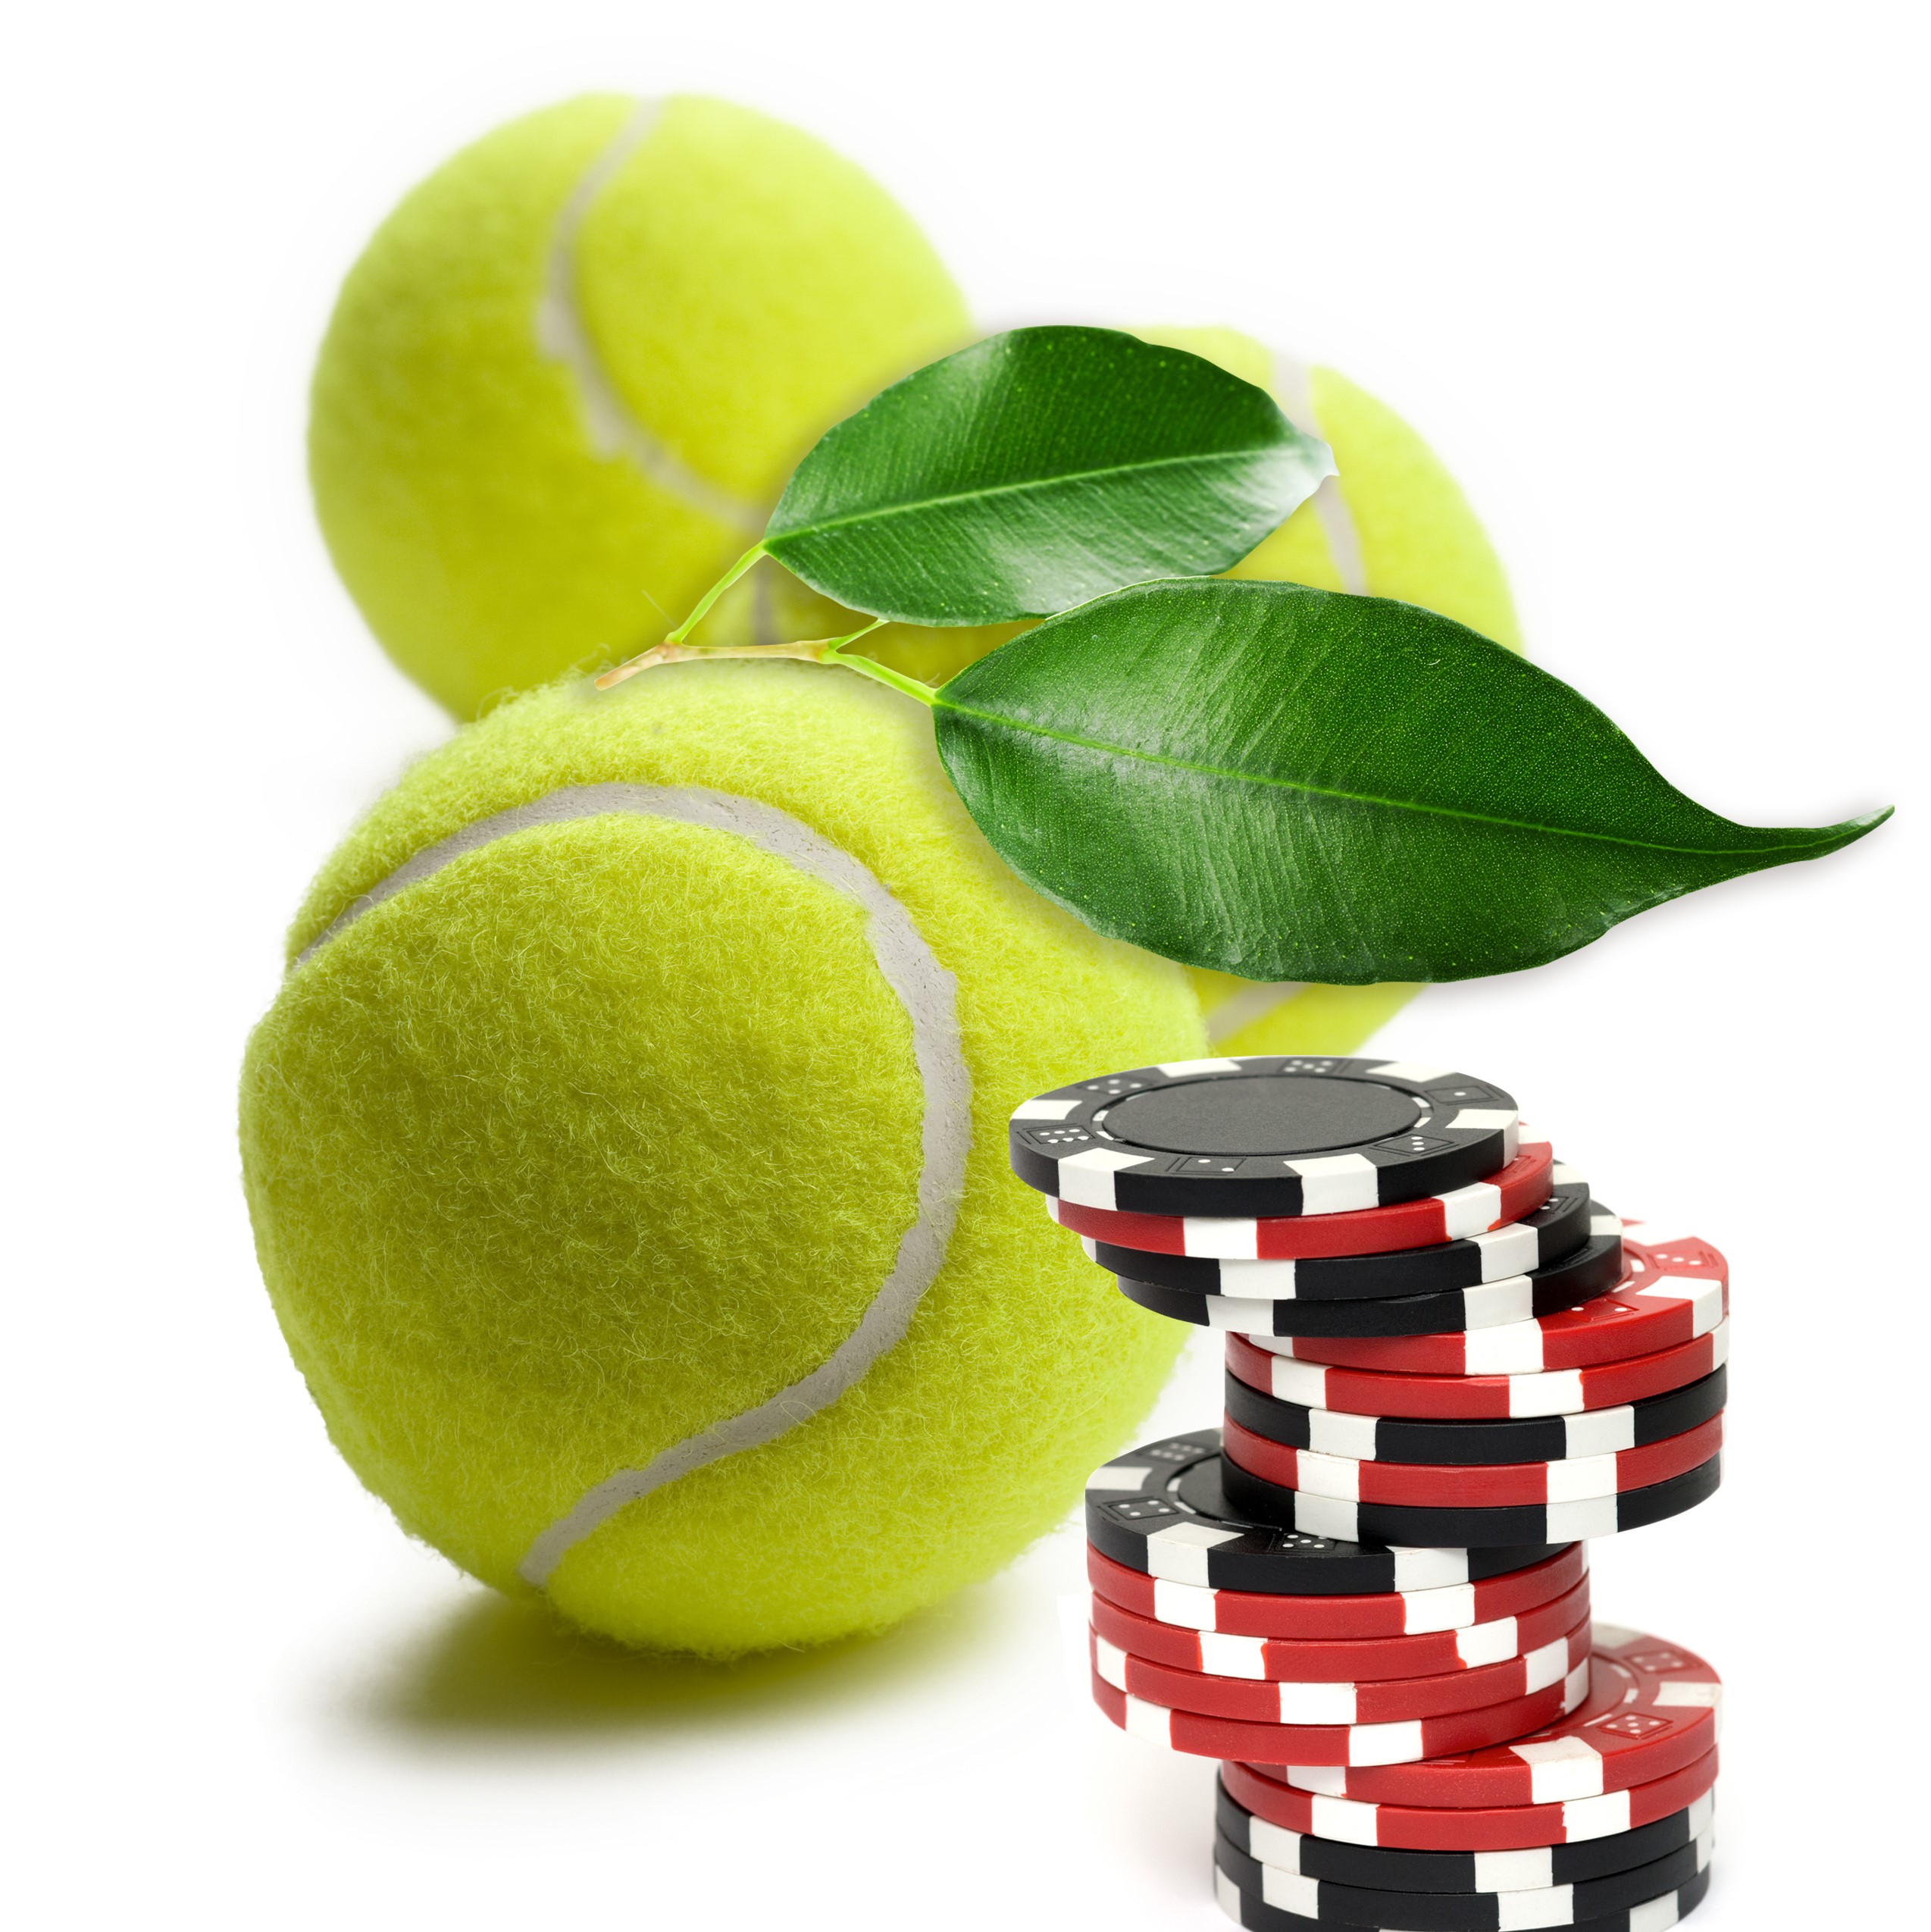 Forbidden Fruit: A win for sports betting